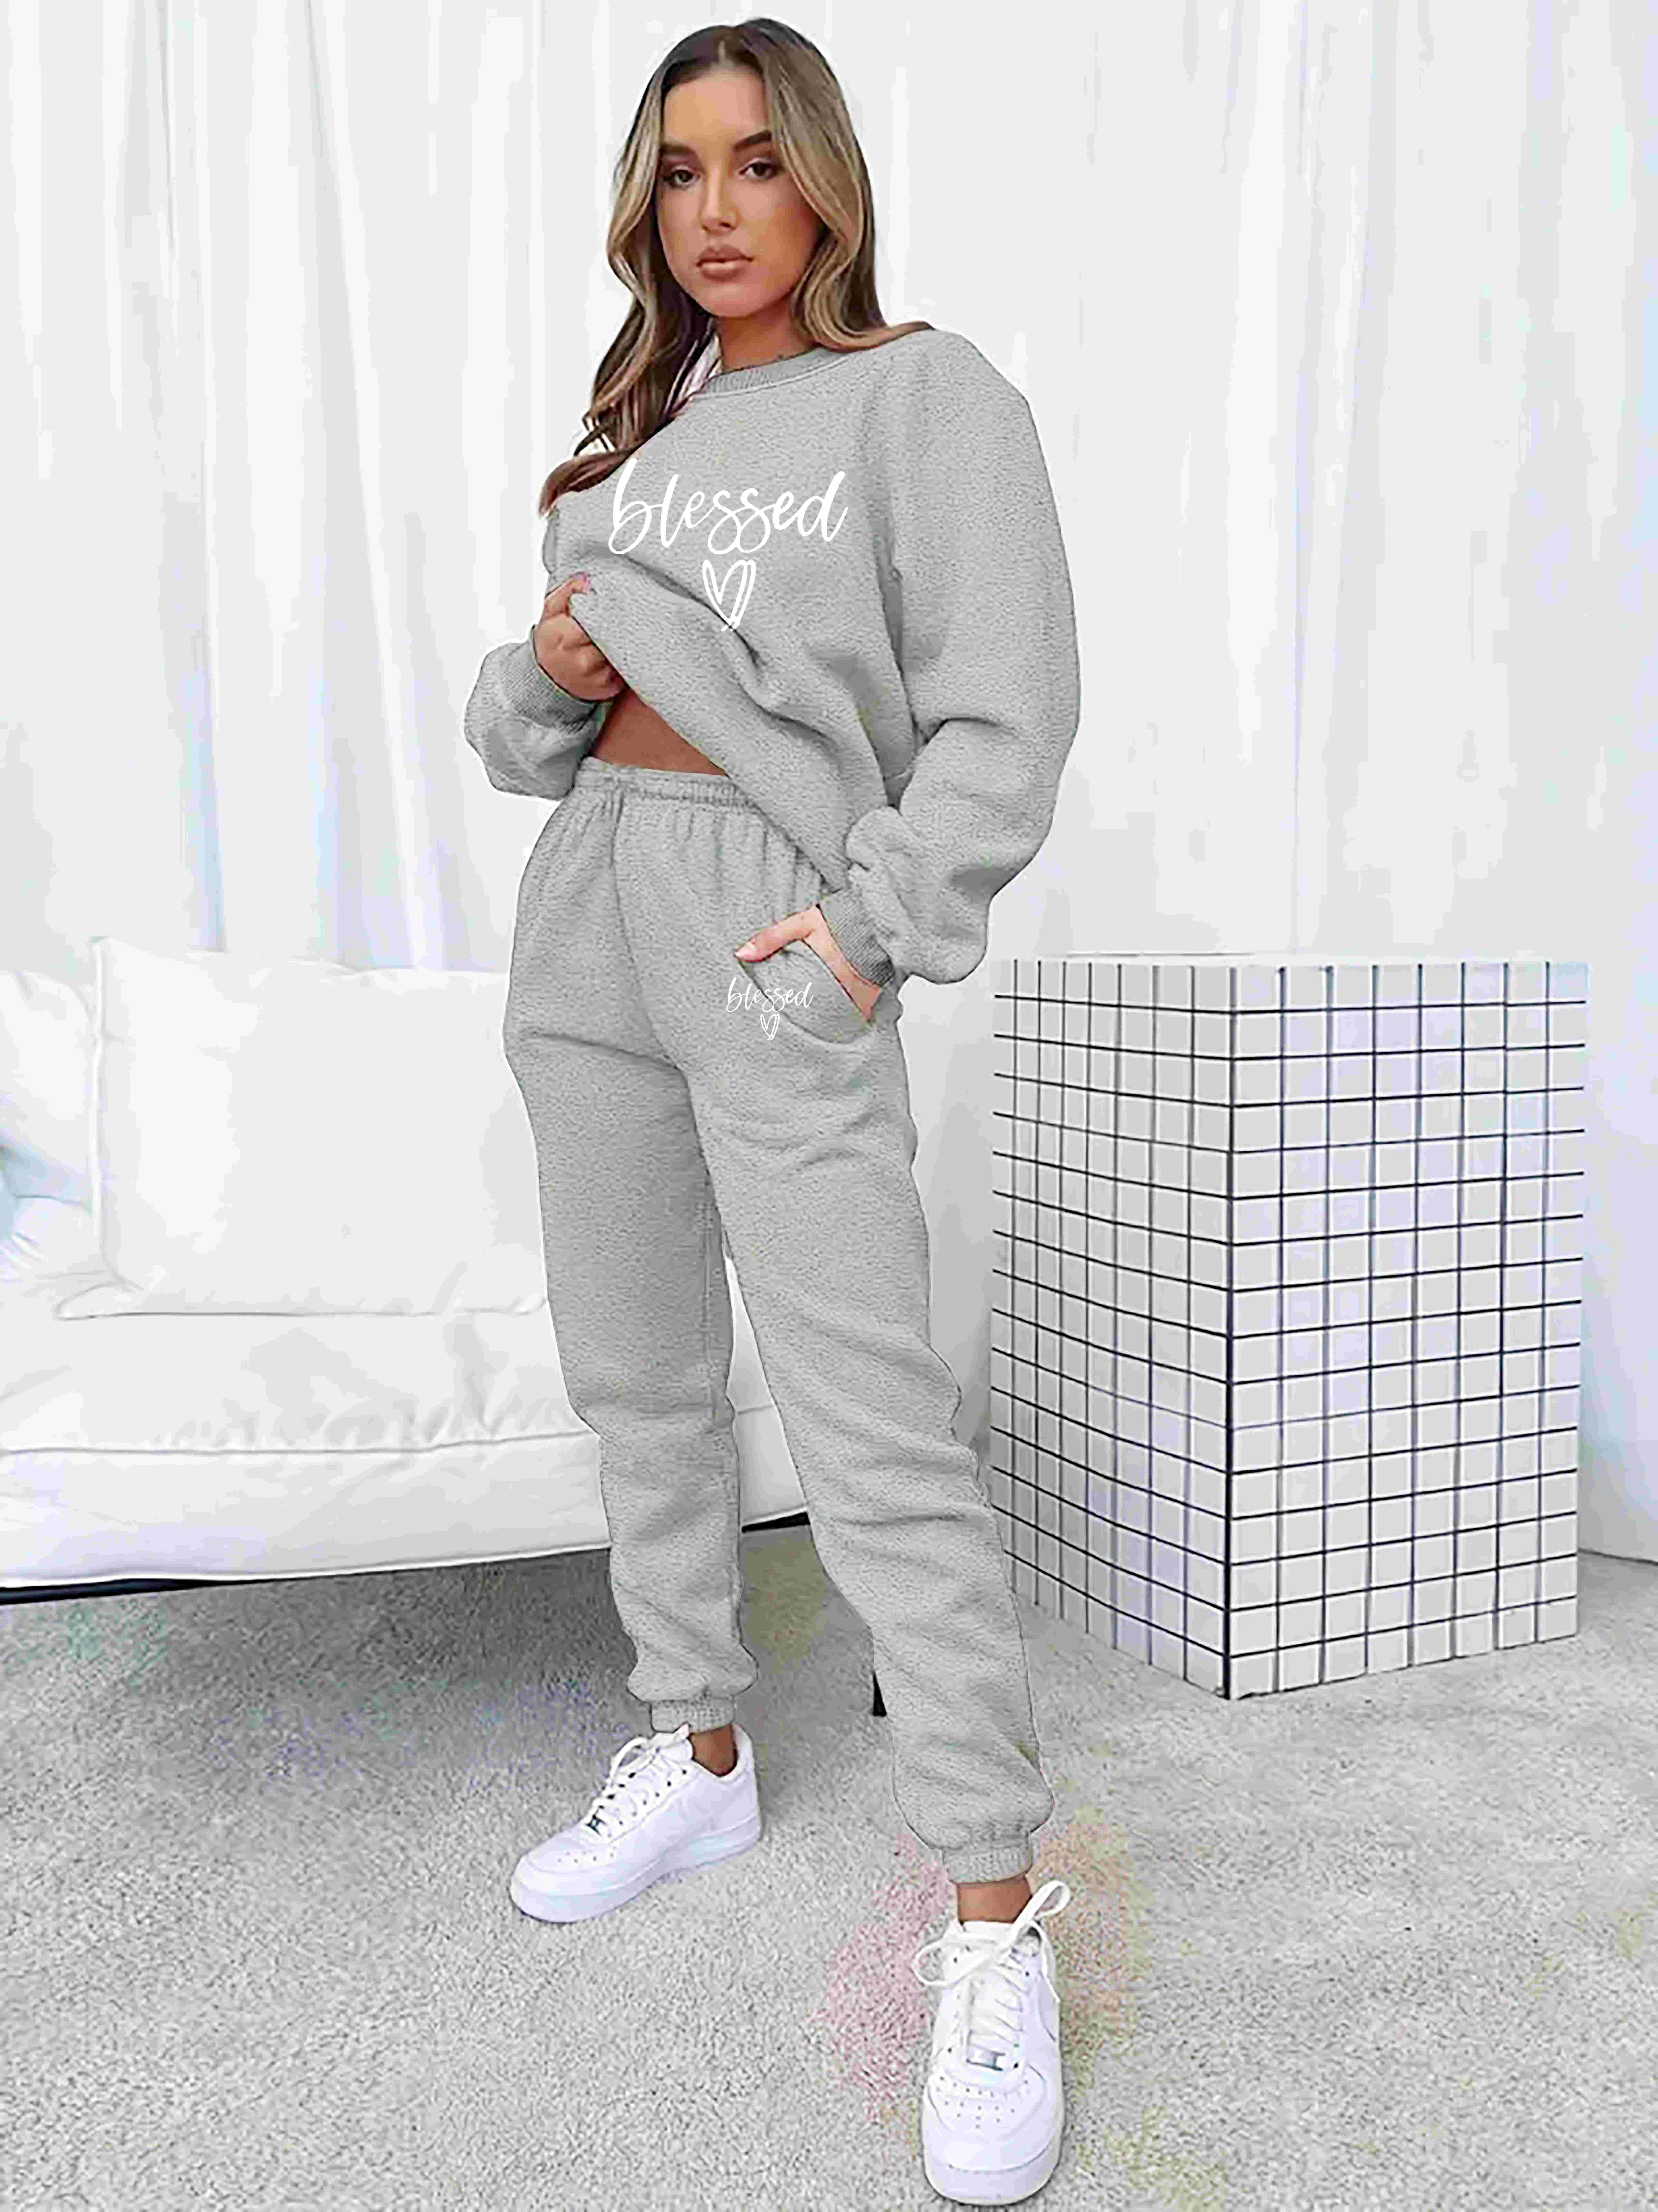 Women 2 Piece Outfits Casual Long Sleeve Sweatshirt and Pants Set Clothes